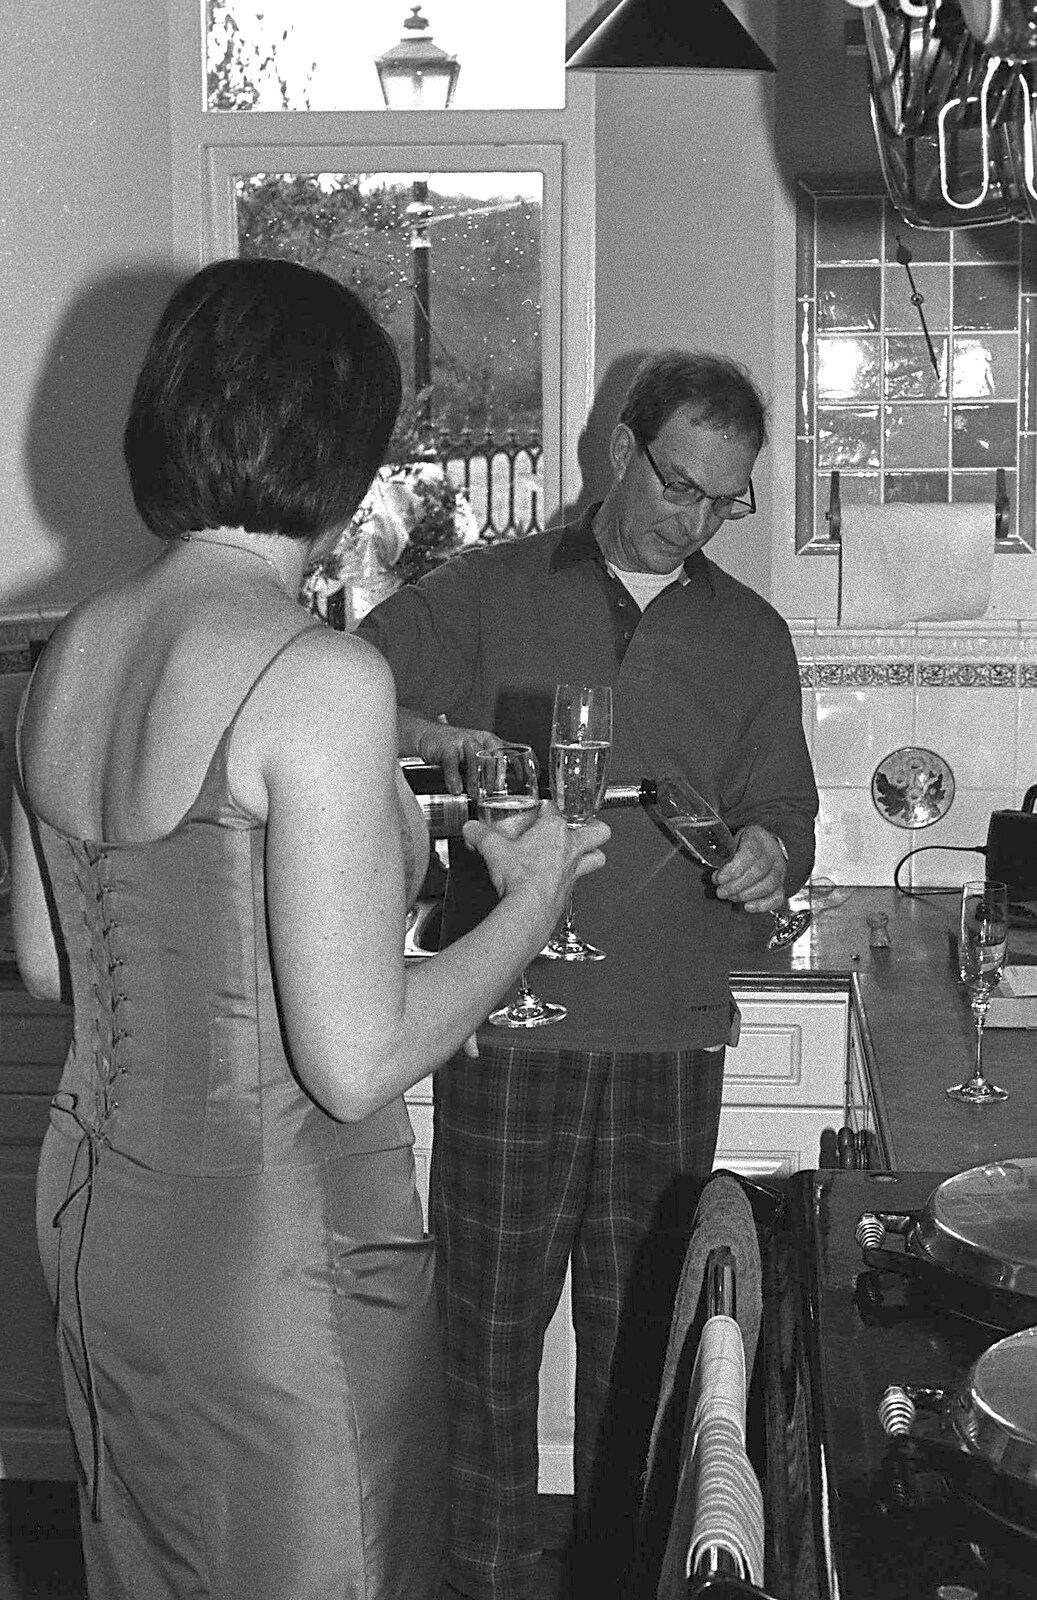 Mike pours a wedding-morning glass of fizz from Sis's Nearly-Christmas Wedding, Meavy, Dartmoor - 20th December 2003